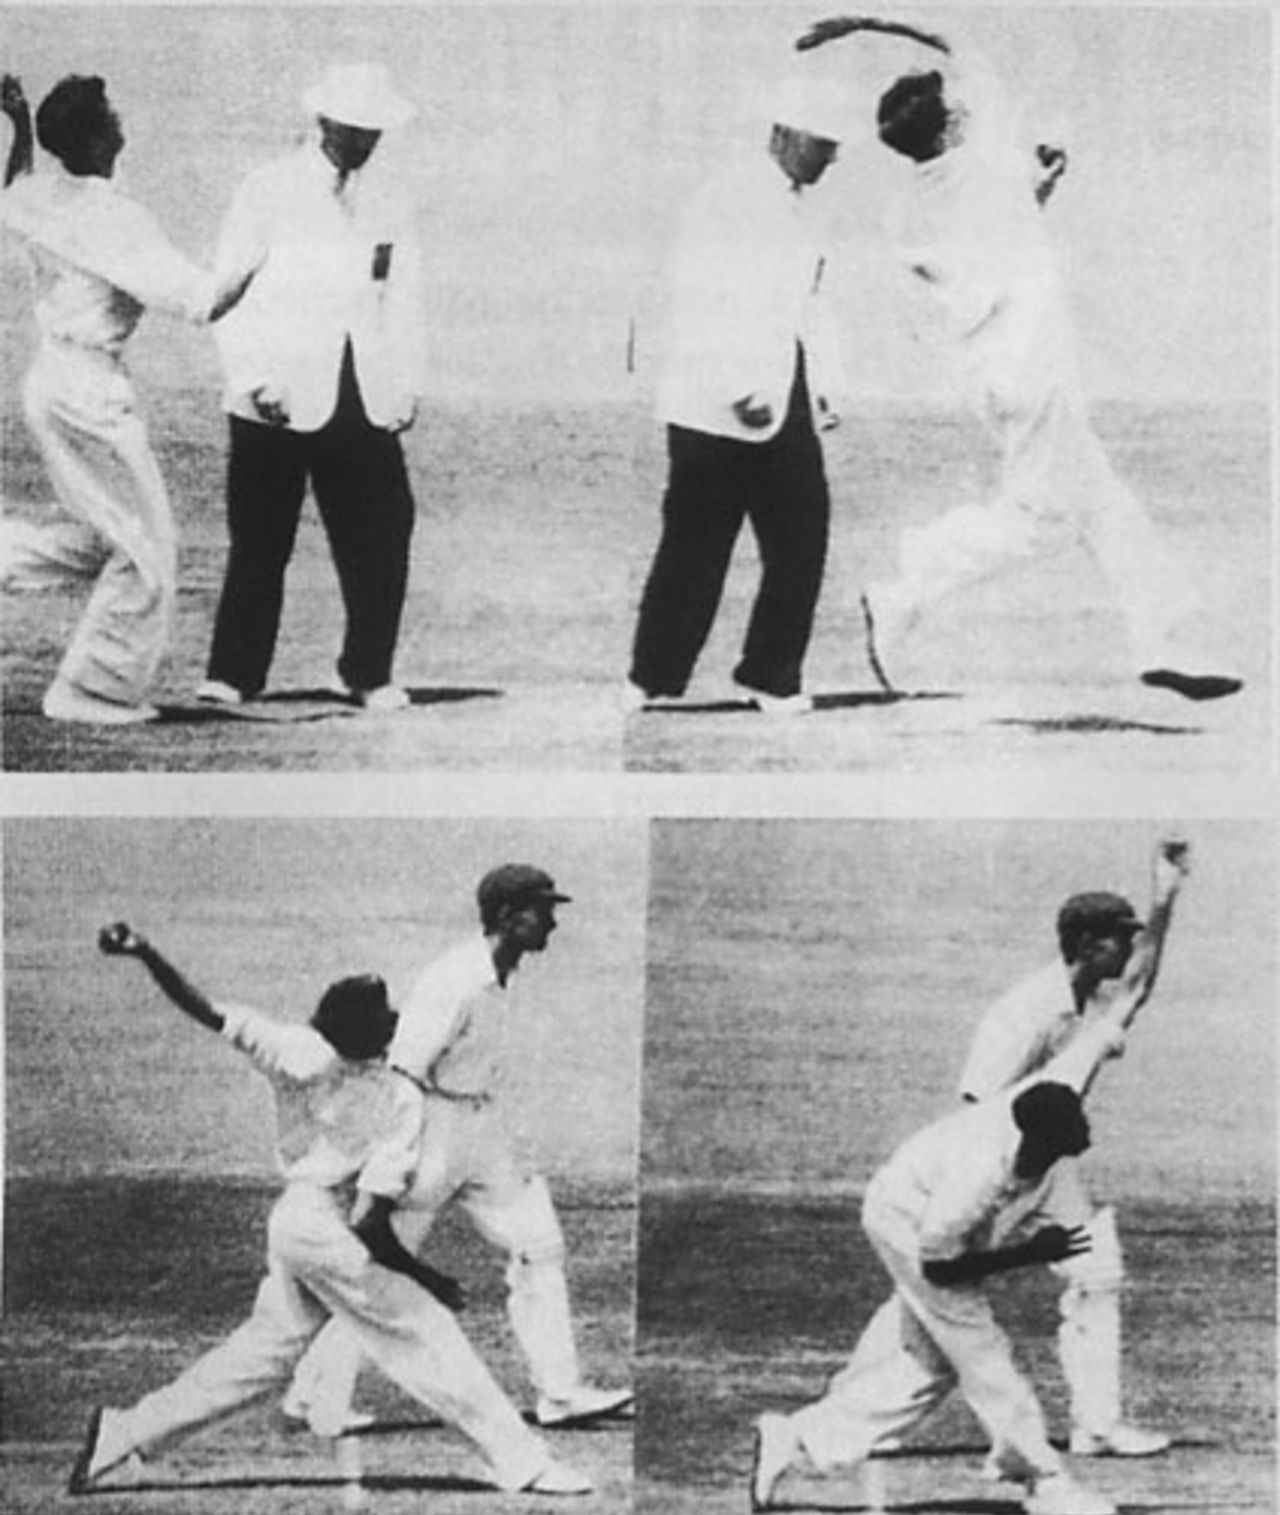 Ian Meckiff filmed during his 6 for 38 against England at the MCG in 1958-59.  After this match he was labelled as a chucker by the British media